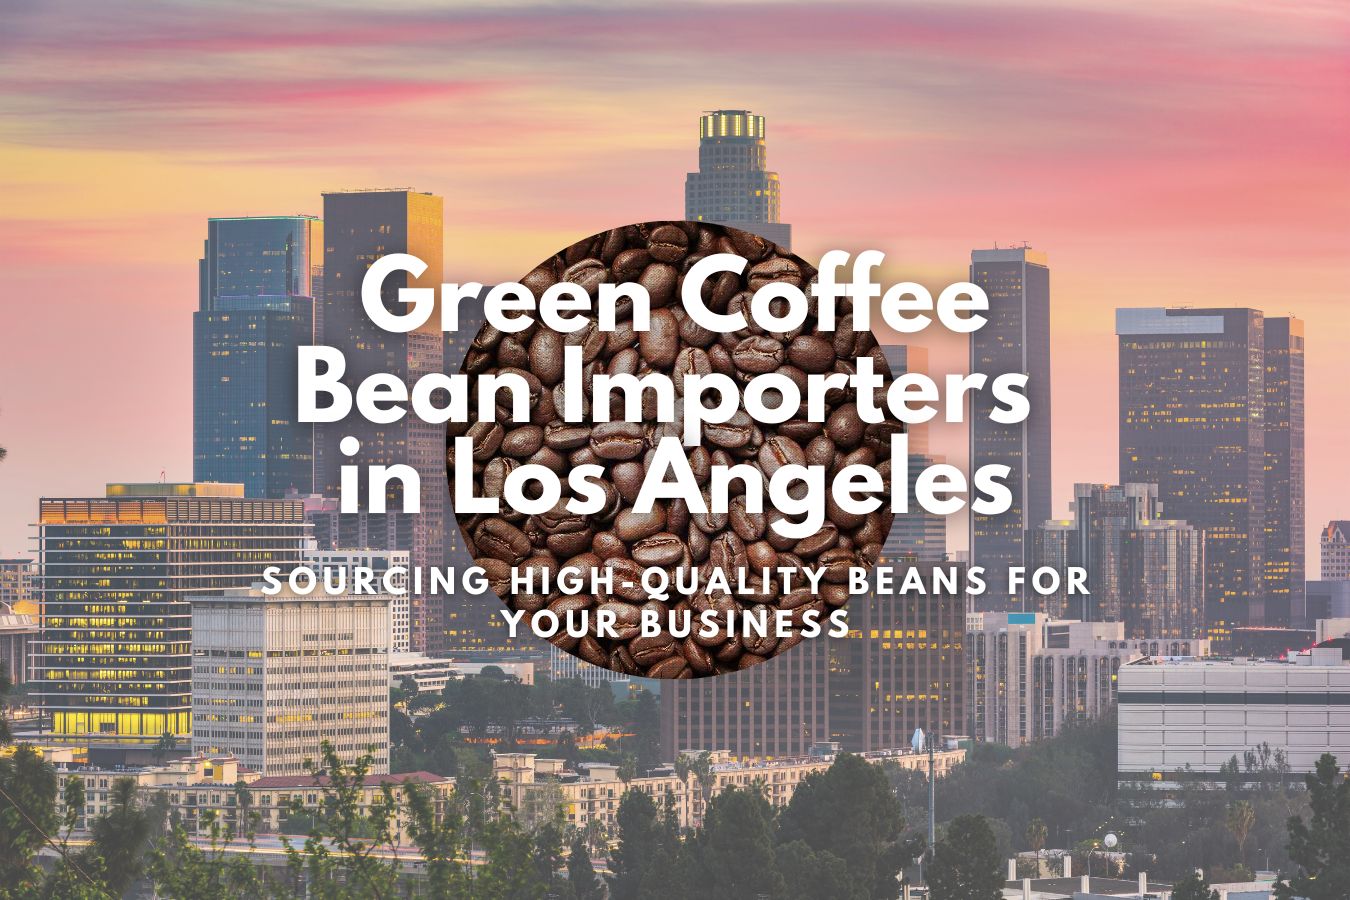 Green Coffee Bean Importers in Los Angeles: Sourcing High-Quality Beans for Your Business